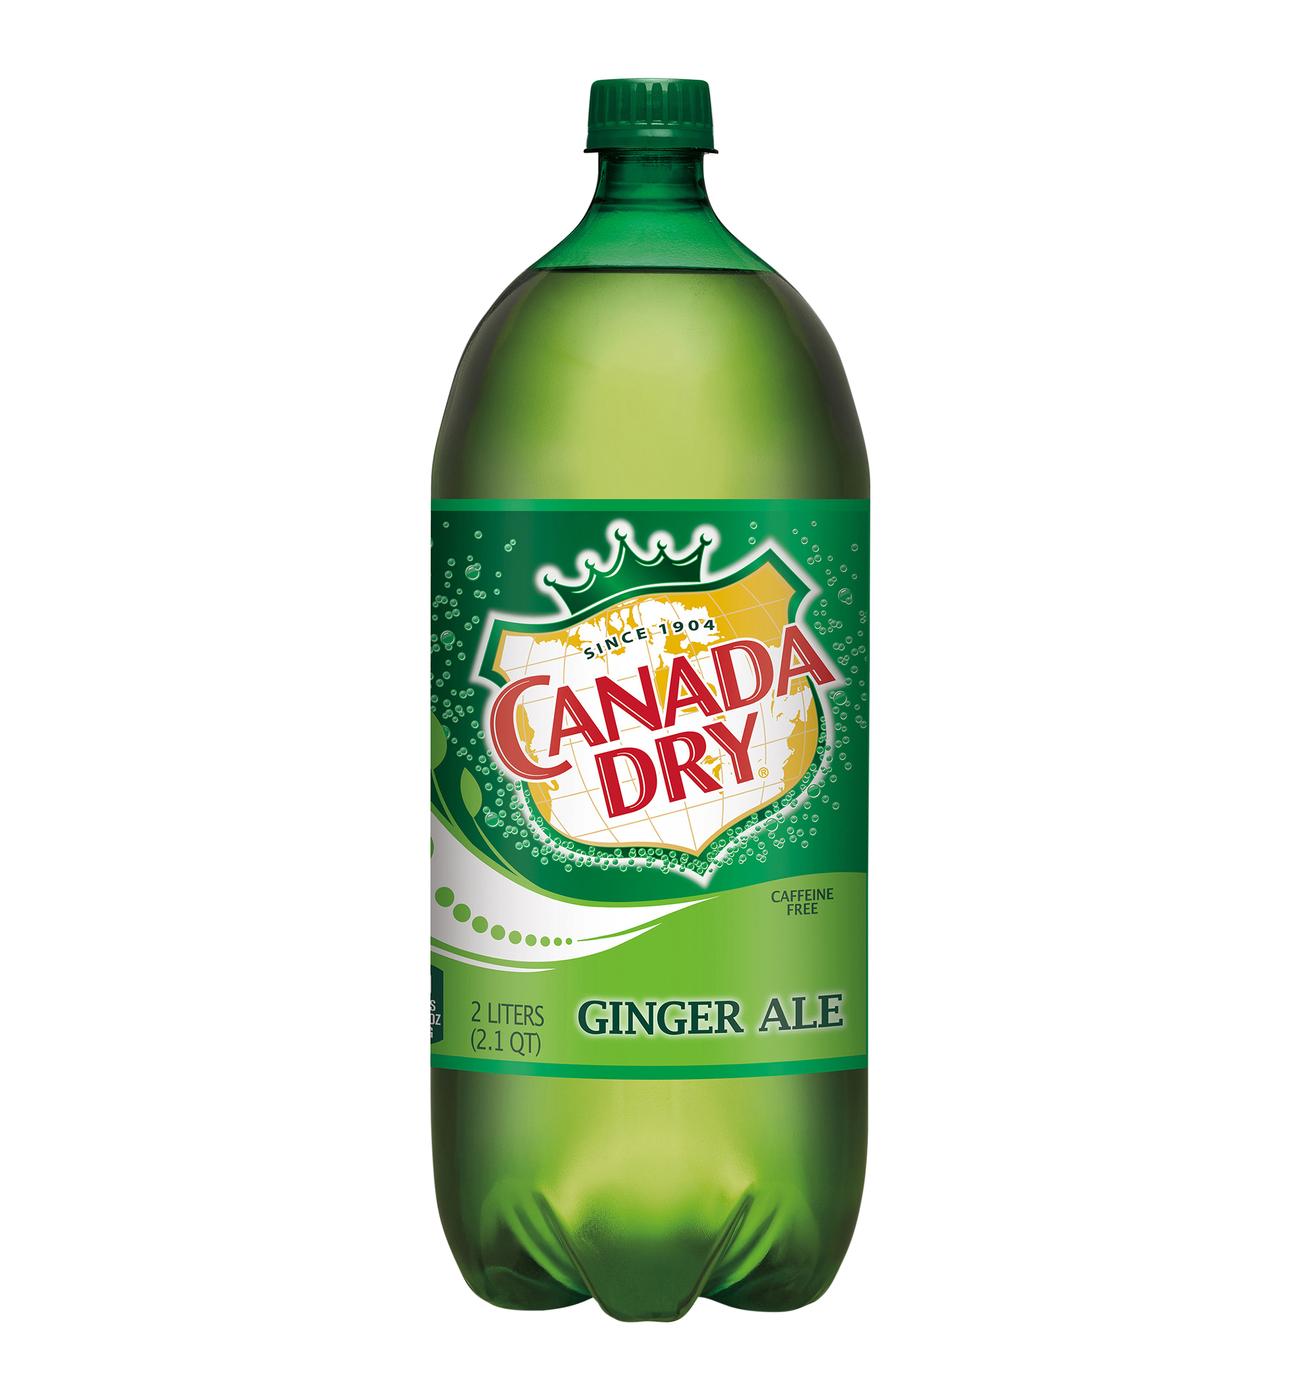 Canada Dry Ginger Ale; image 1 of 2